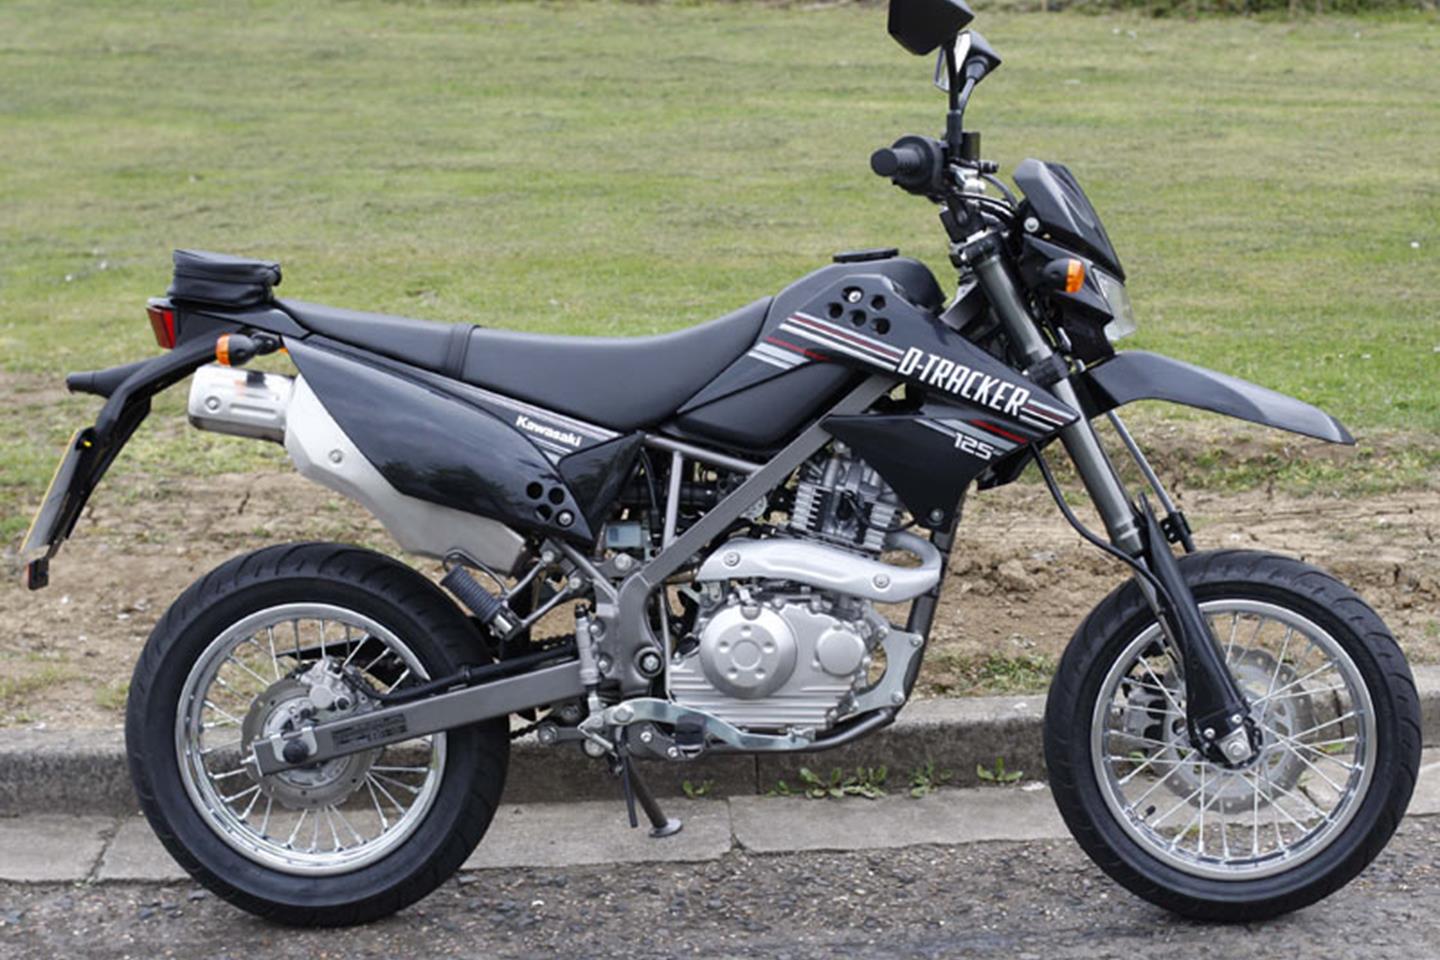 KAWASAKI D-TRACKER 125 (2010-on) Review, Specs & Prices